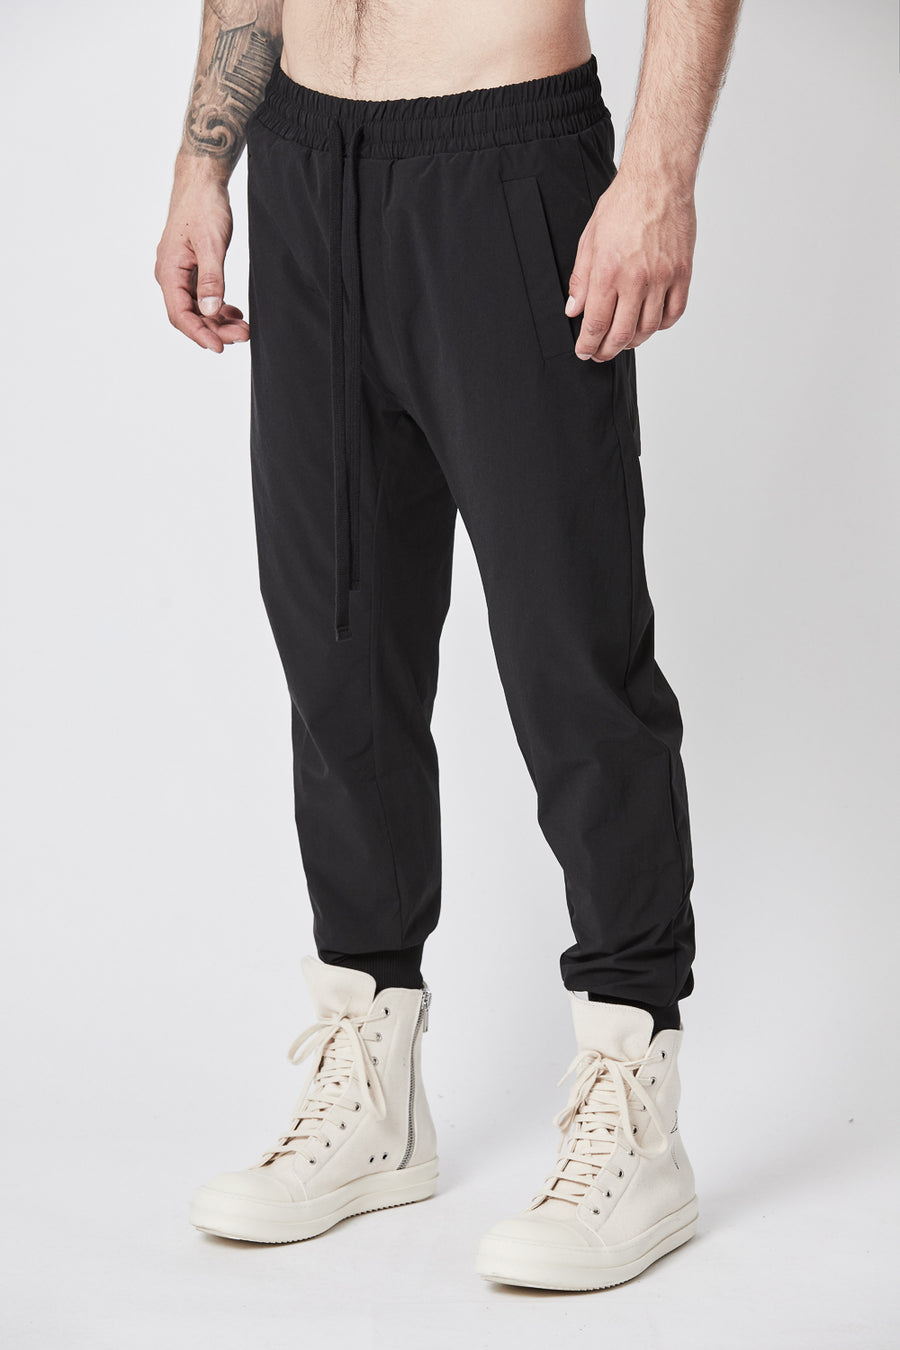 Buy the Thom Krom M ST 309 Sweatpants in Black at Intro. Spend £50 for free UK delivery. Official stockists. We ship worldwide.